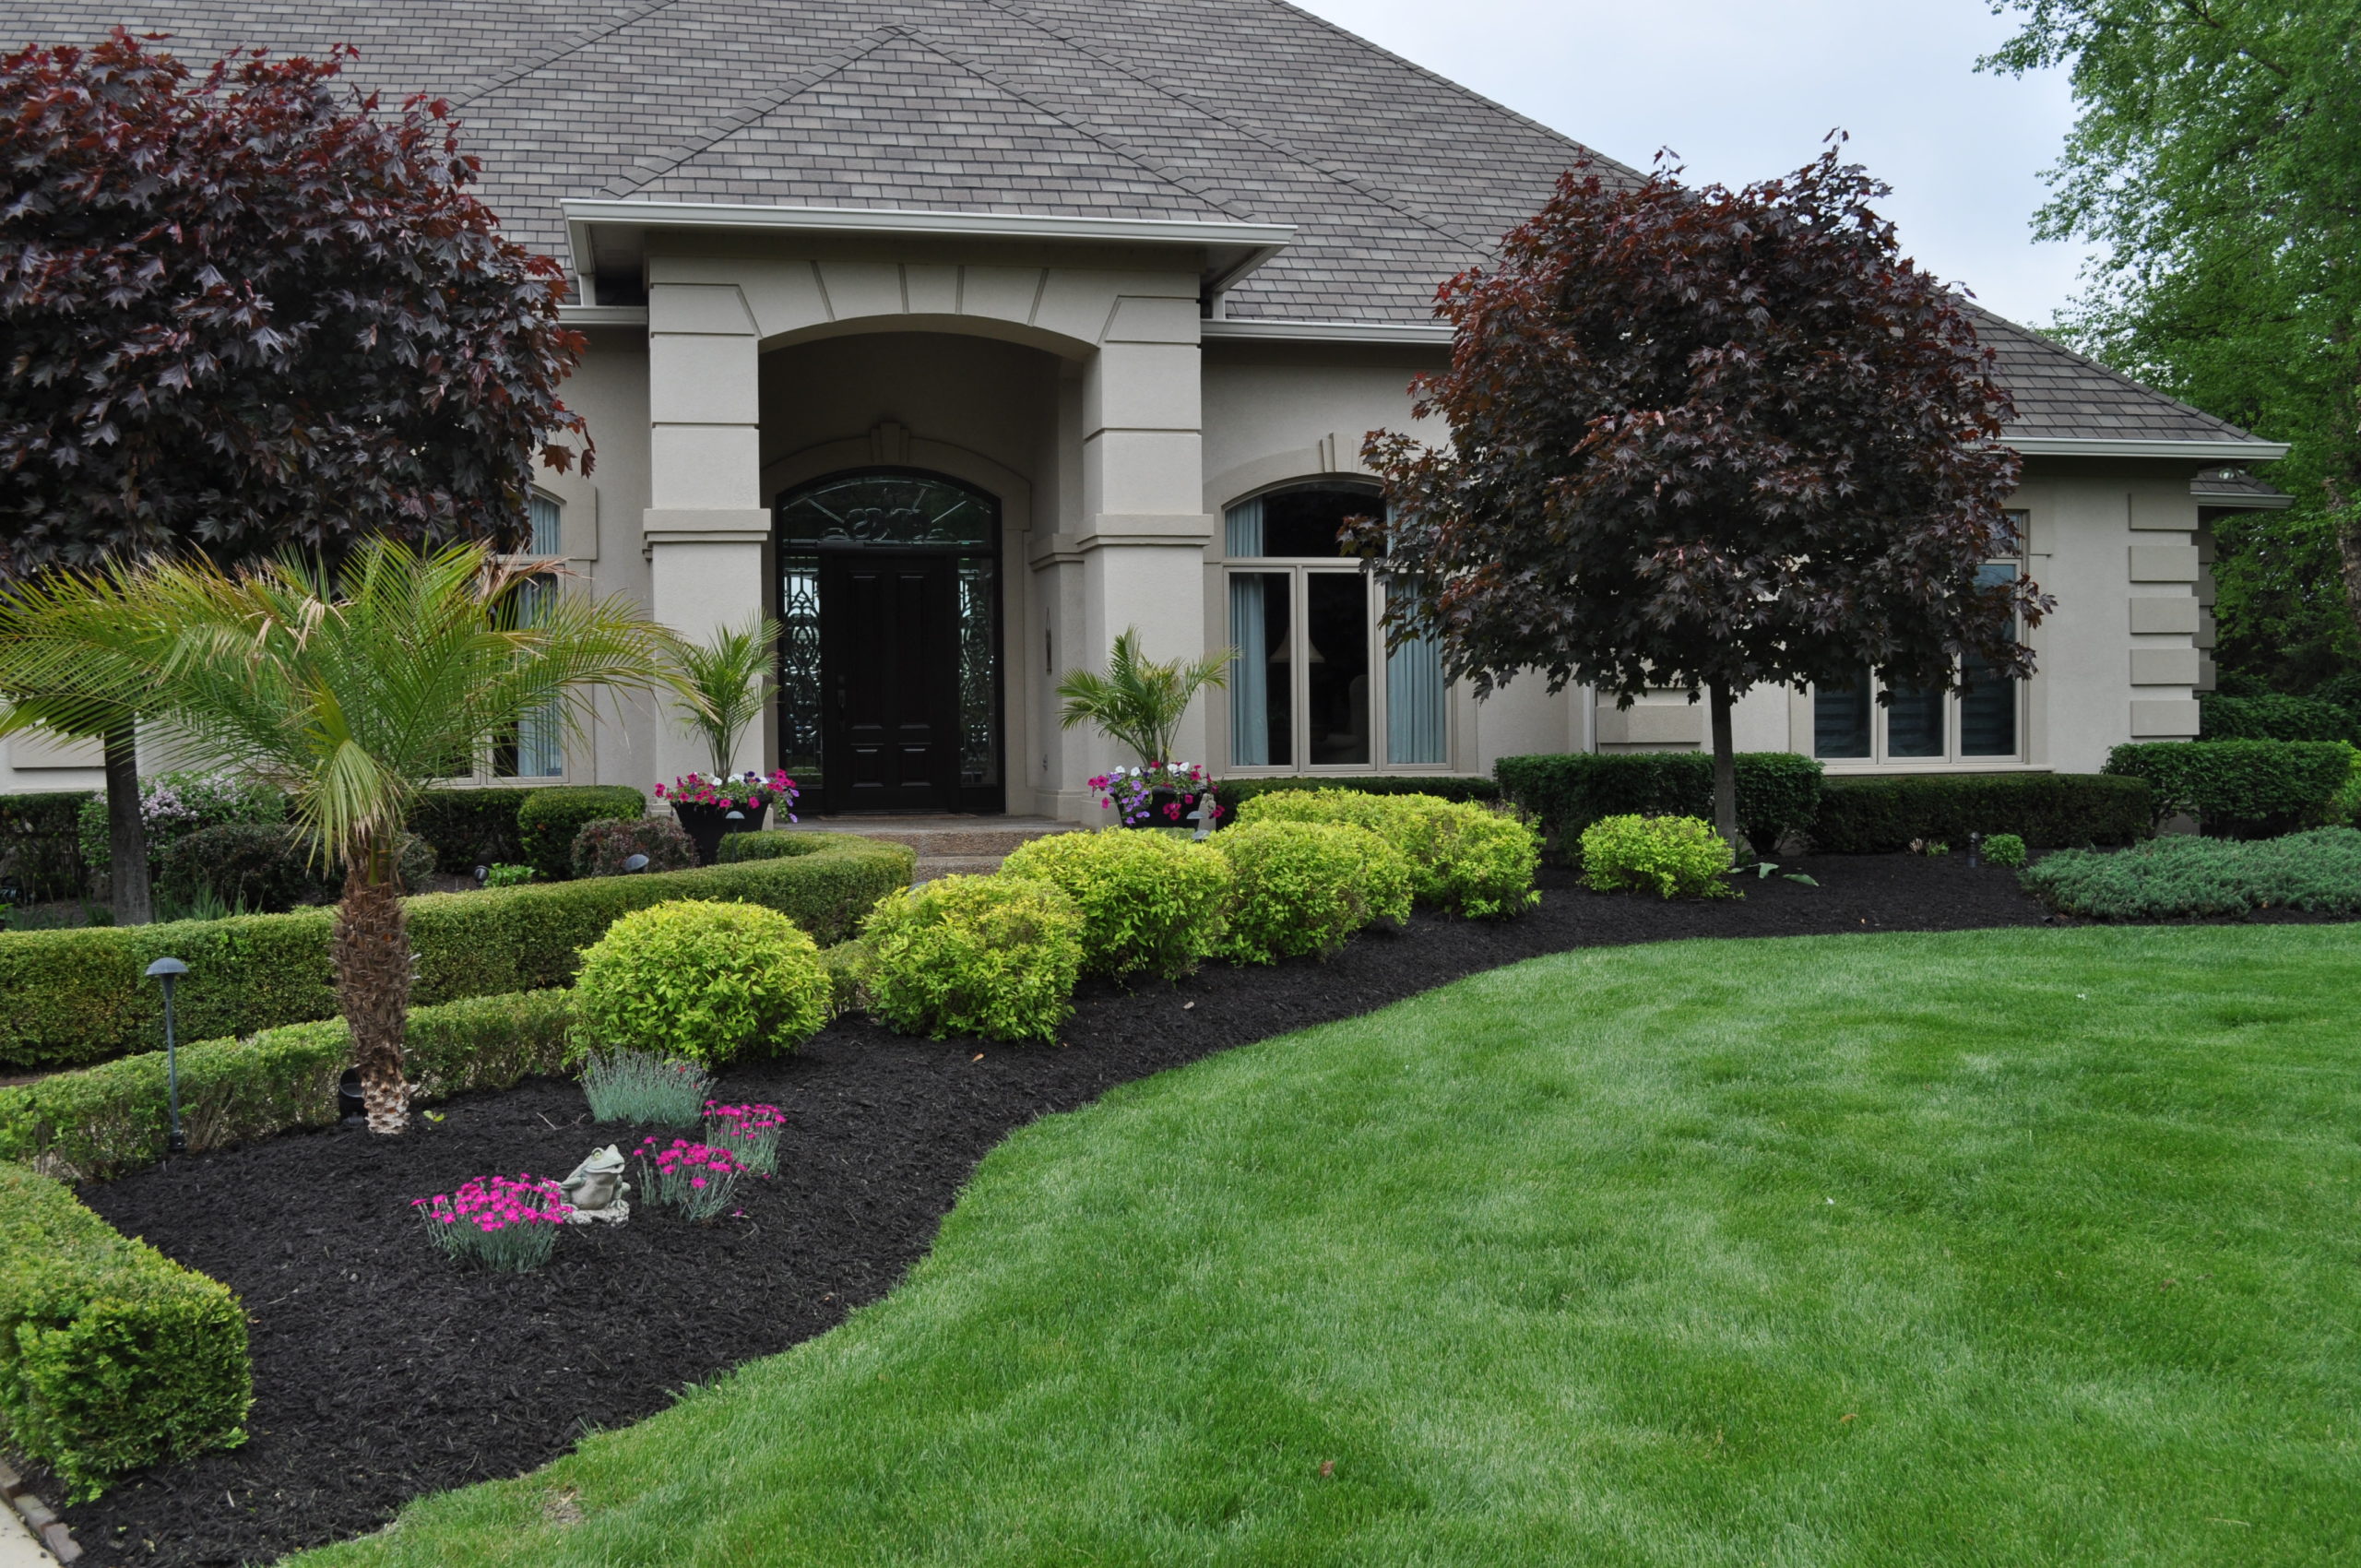 Dark mulch with plants in front of house